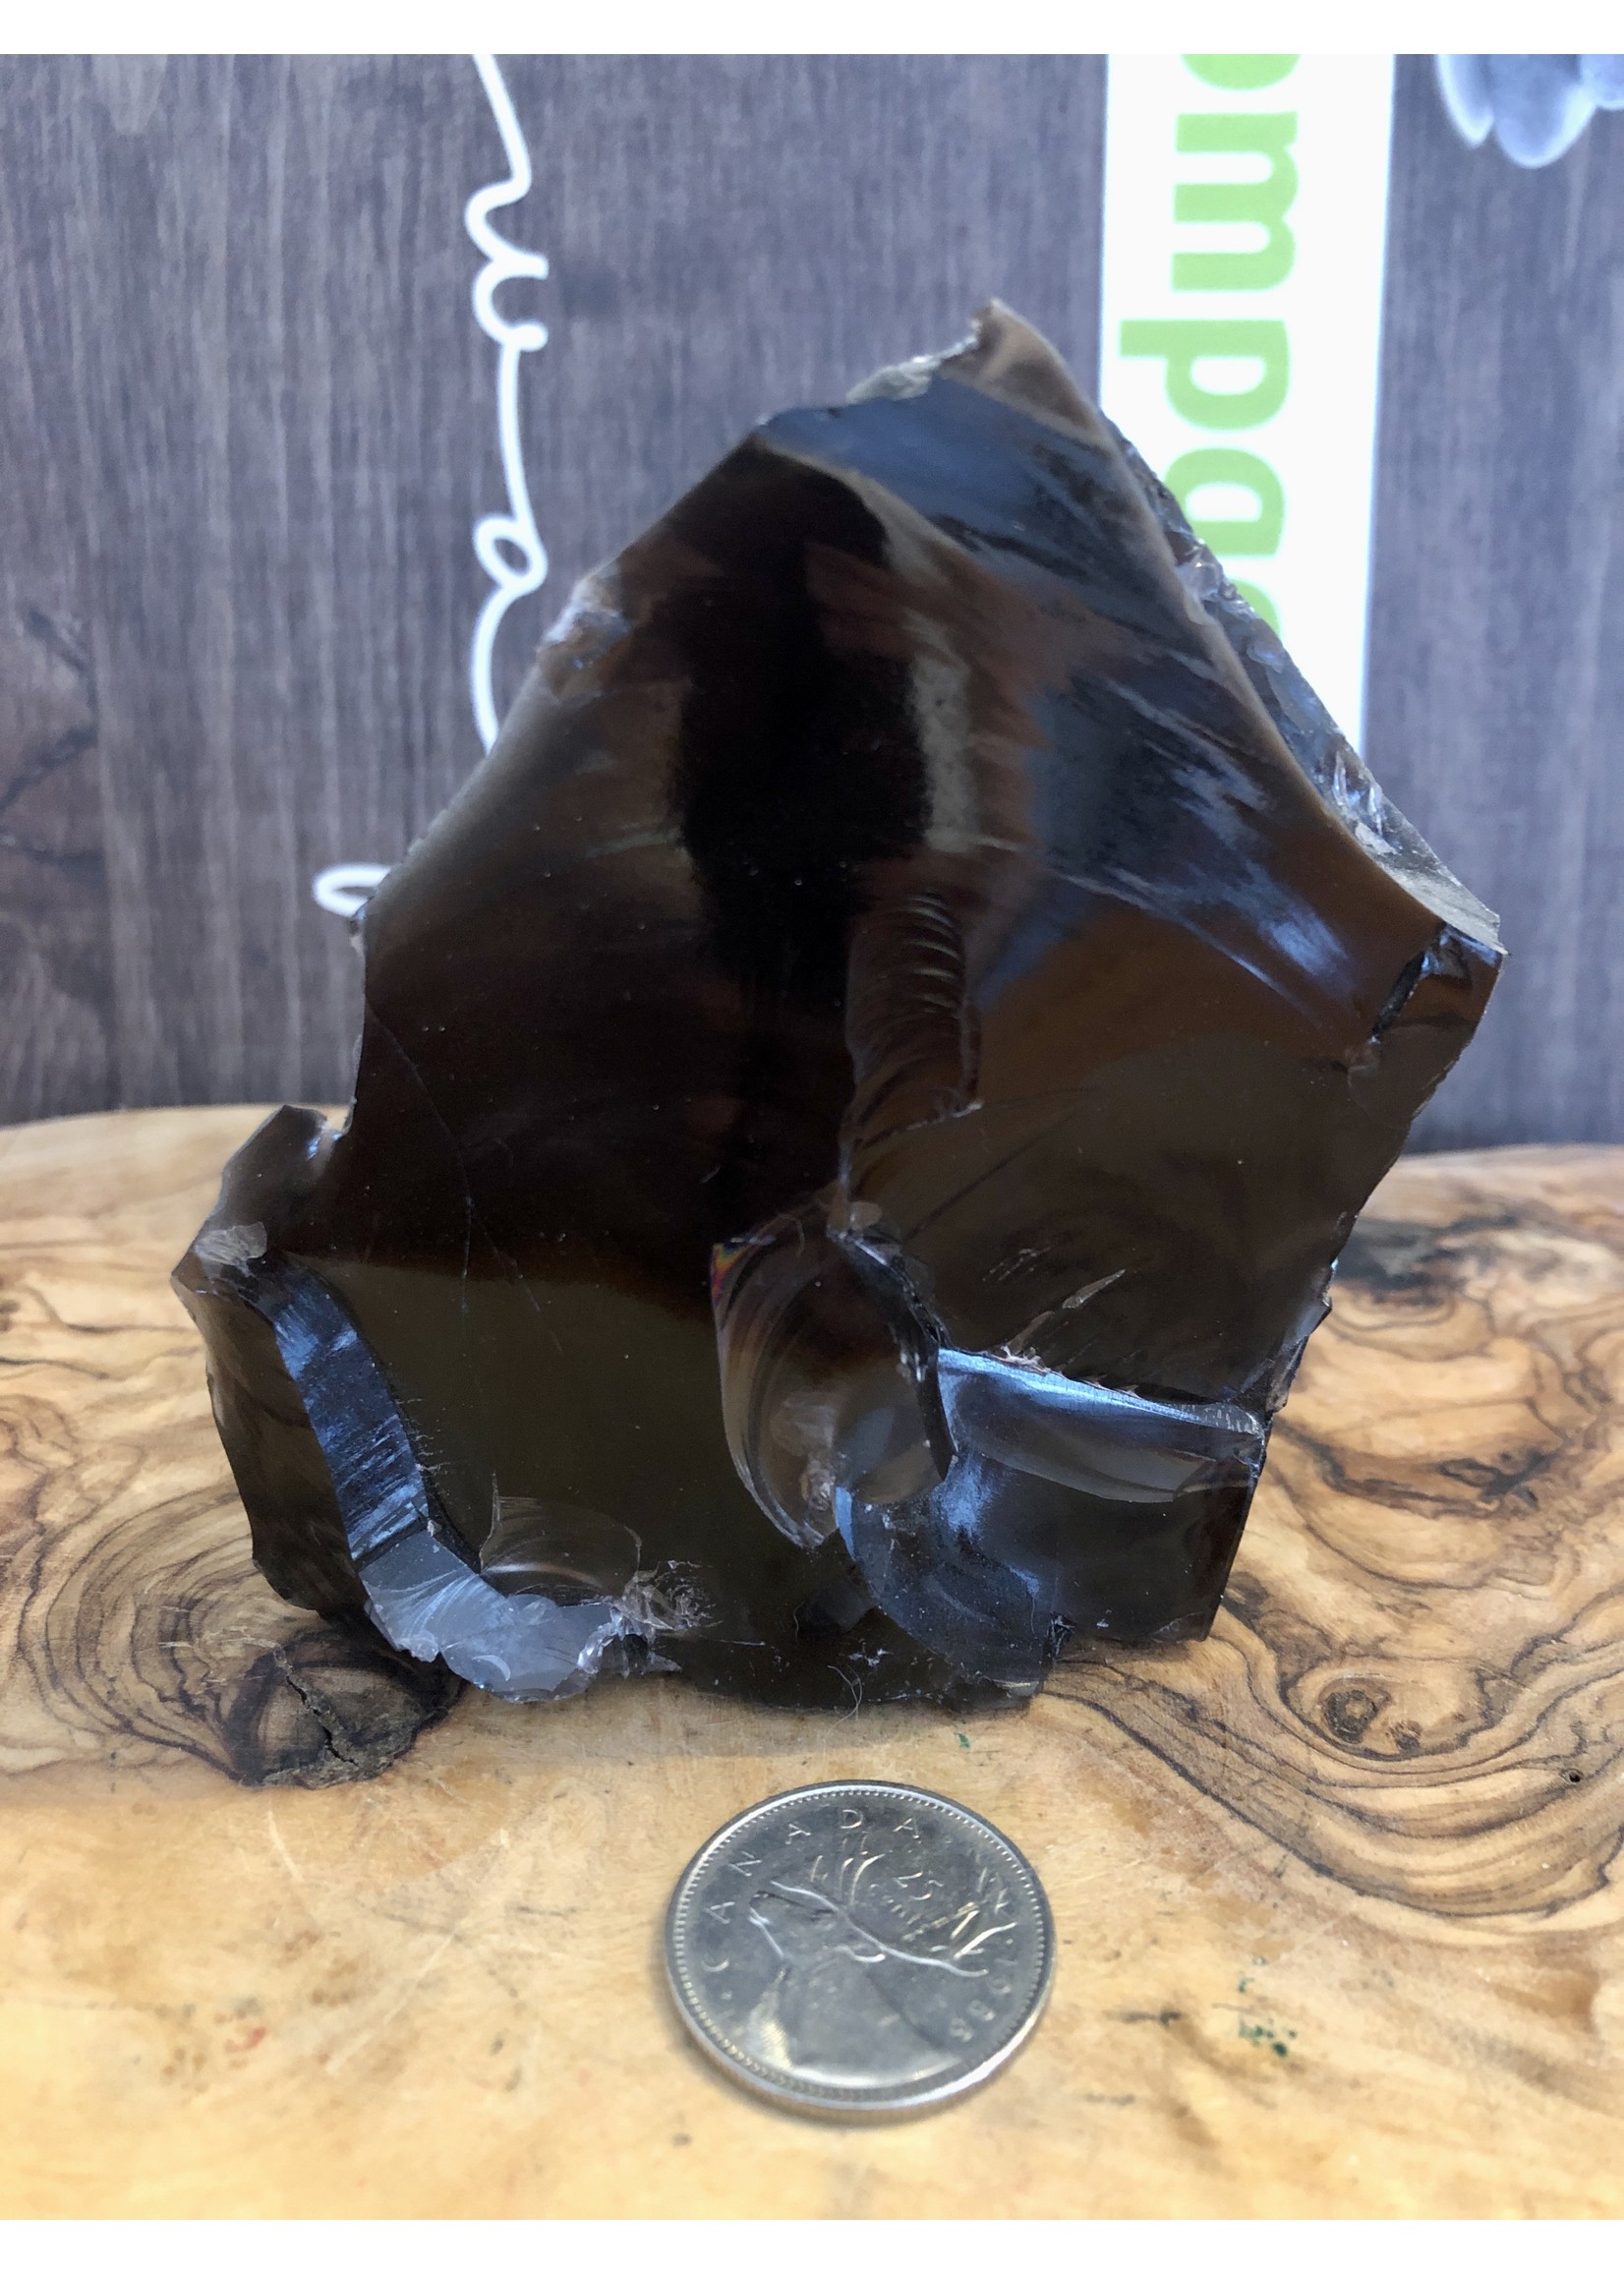 beautiful rainbow obsidian polished, brings hope enlightenment and energy to the most blocked and stagnant areas of the emotional body